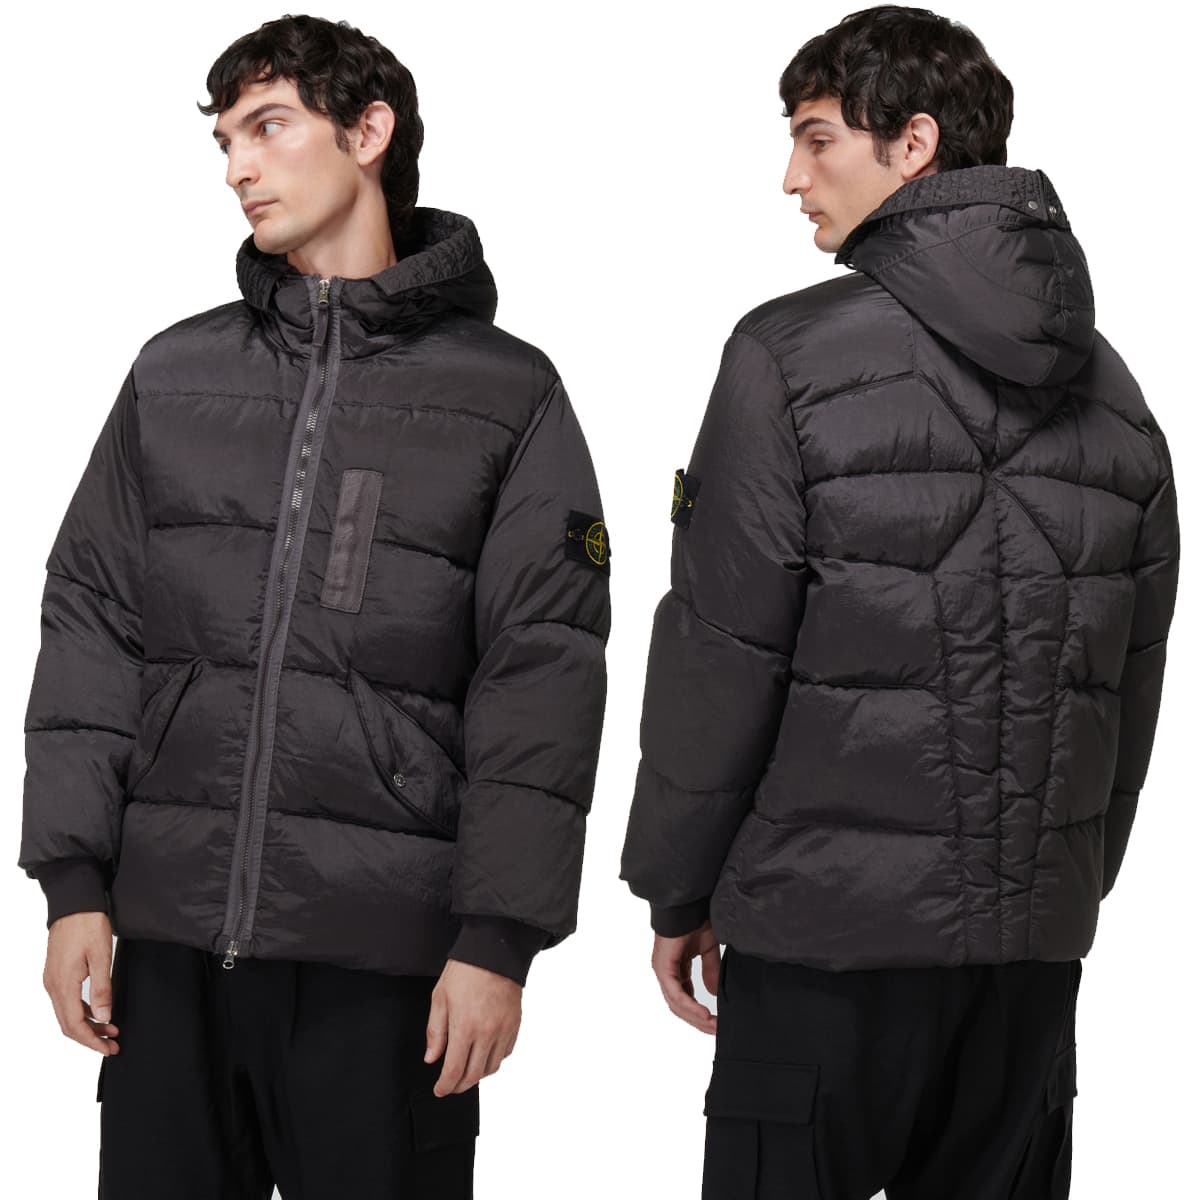 This Stone Island down jacket has a unique iridescent look thanks to the brand's garment-dyed regenerated nylon